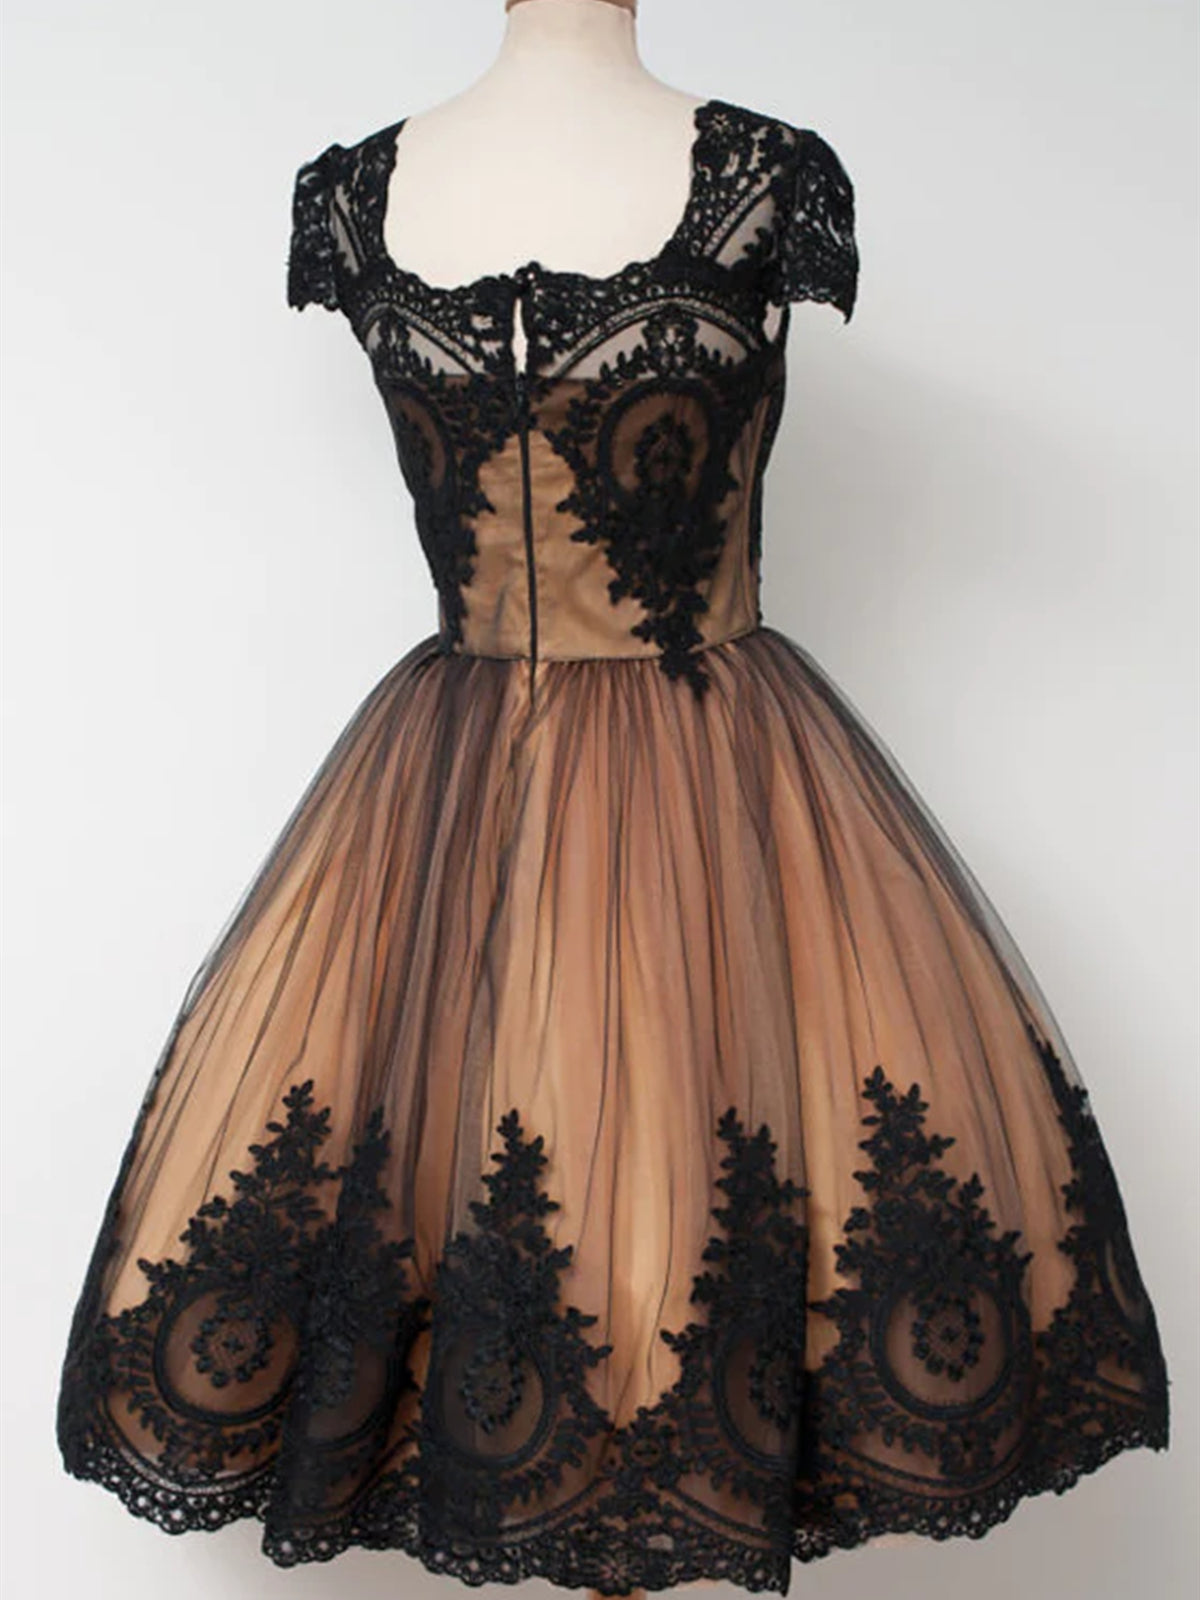 Party Dress Outfits, Short Cap Sleeves Black Lace Prom Dresses, Short Black Lace Graduation Homecoming Dresses